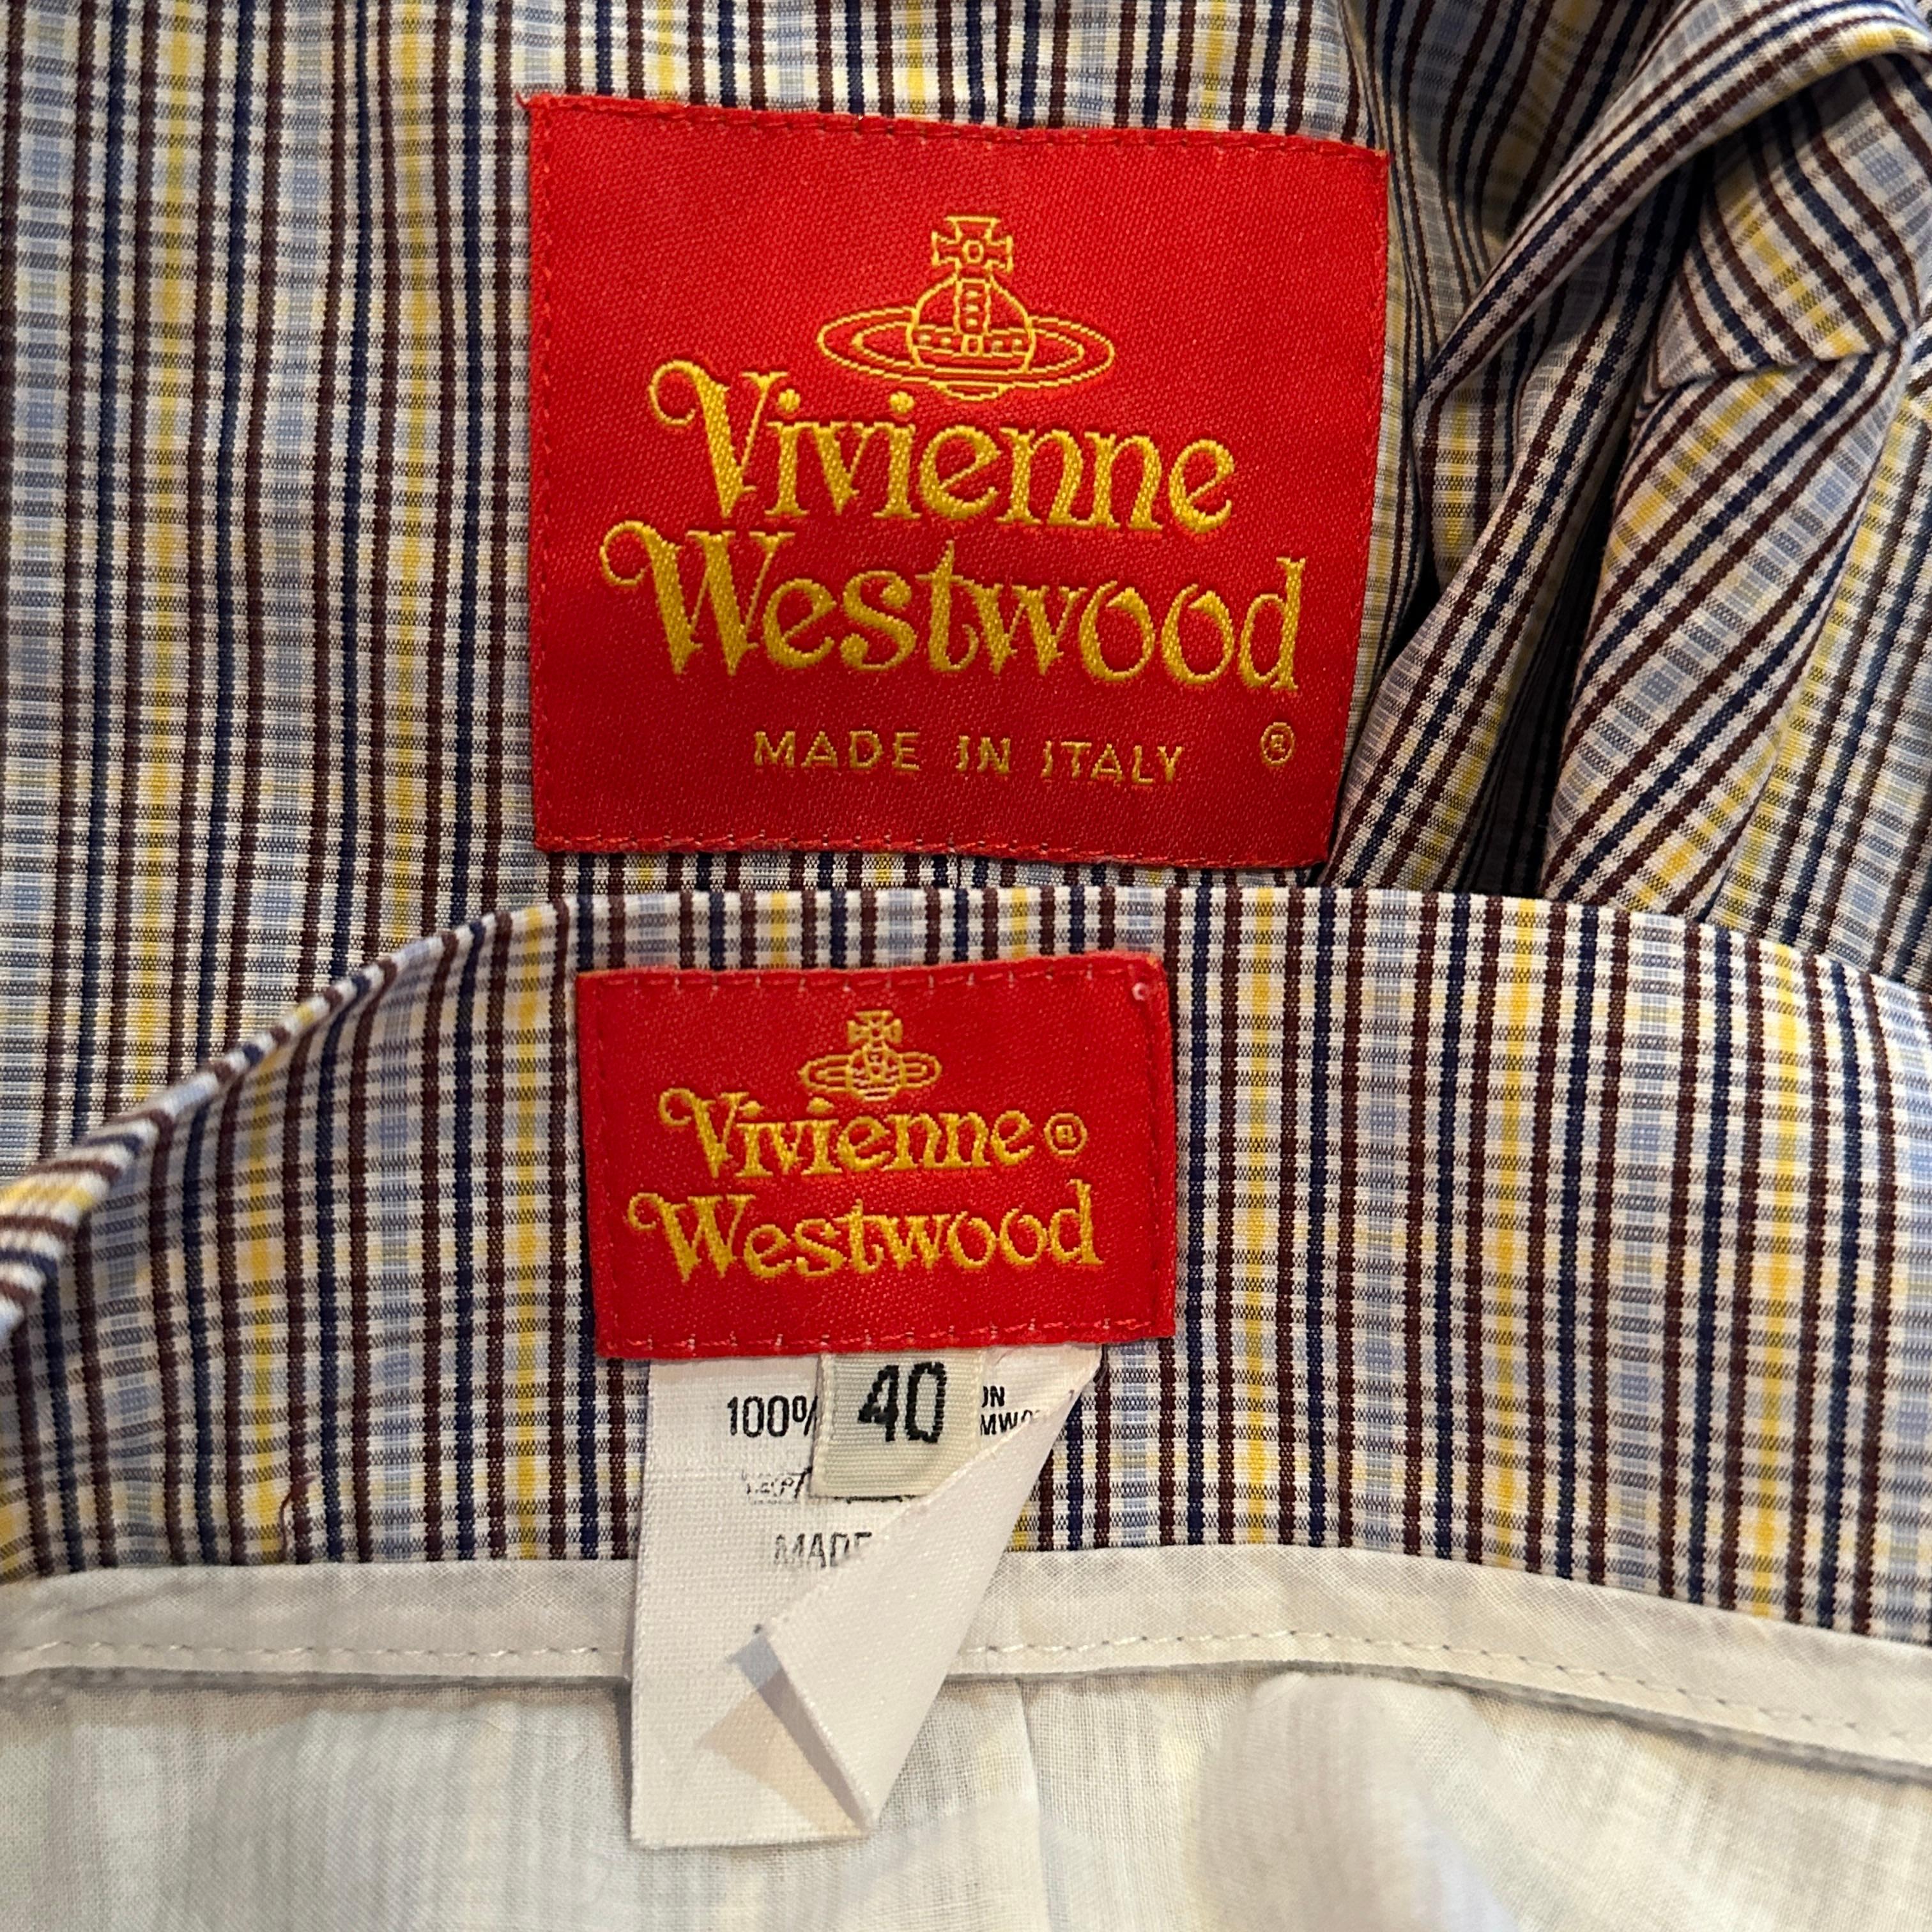 Vivienne Westwood Spring 1994 Checked Two Piece Skirt Suit Set In Excellent Condition For Sale In Hertfordshire, GB